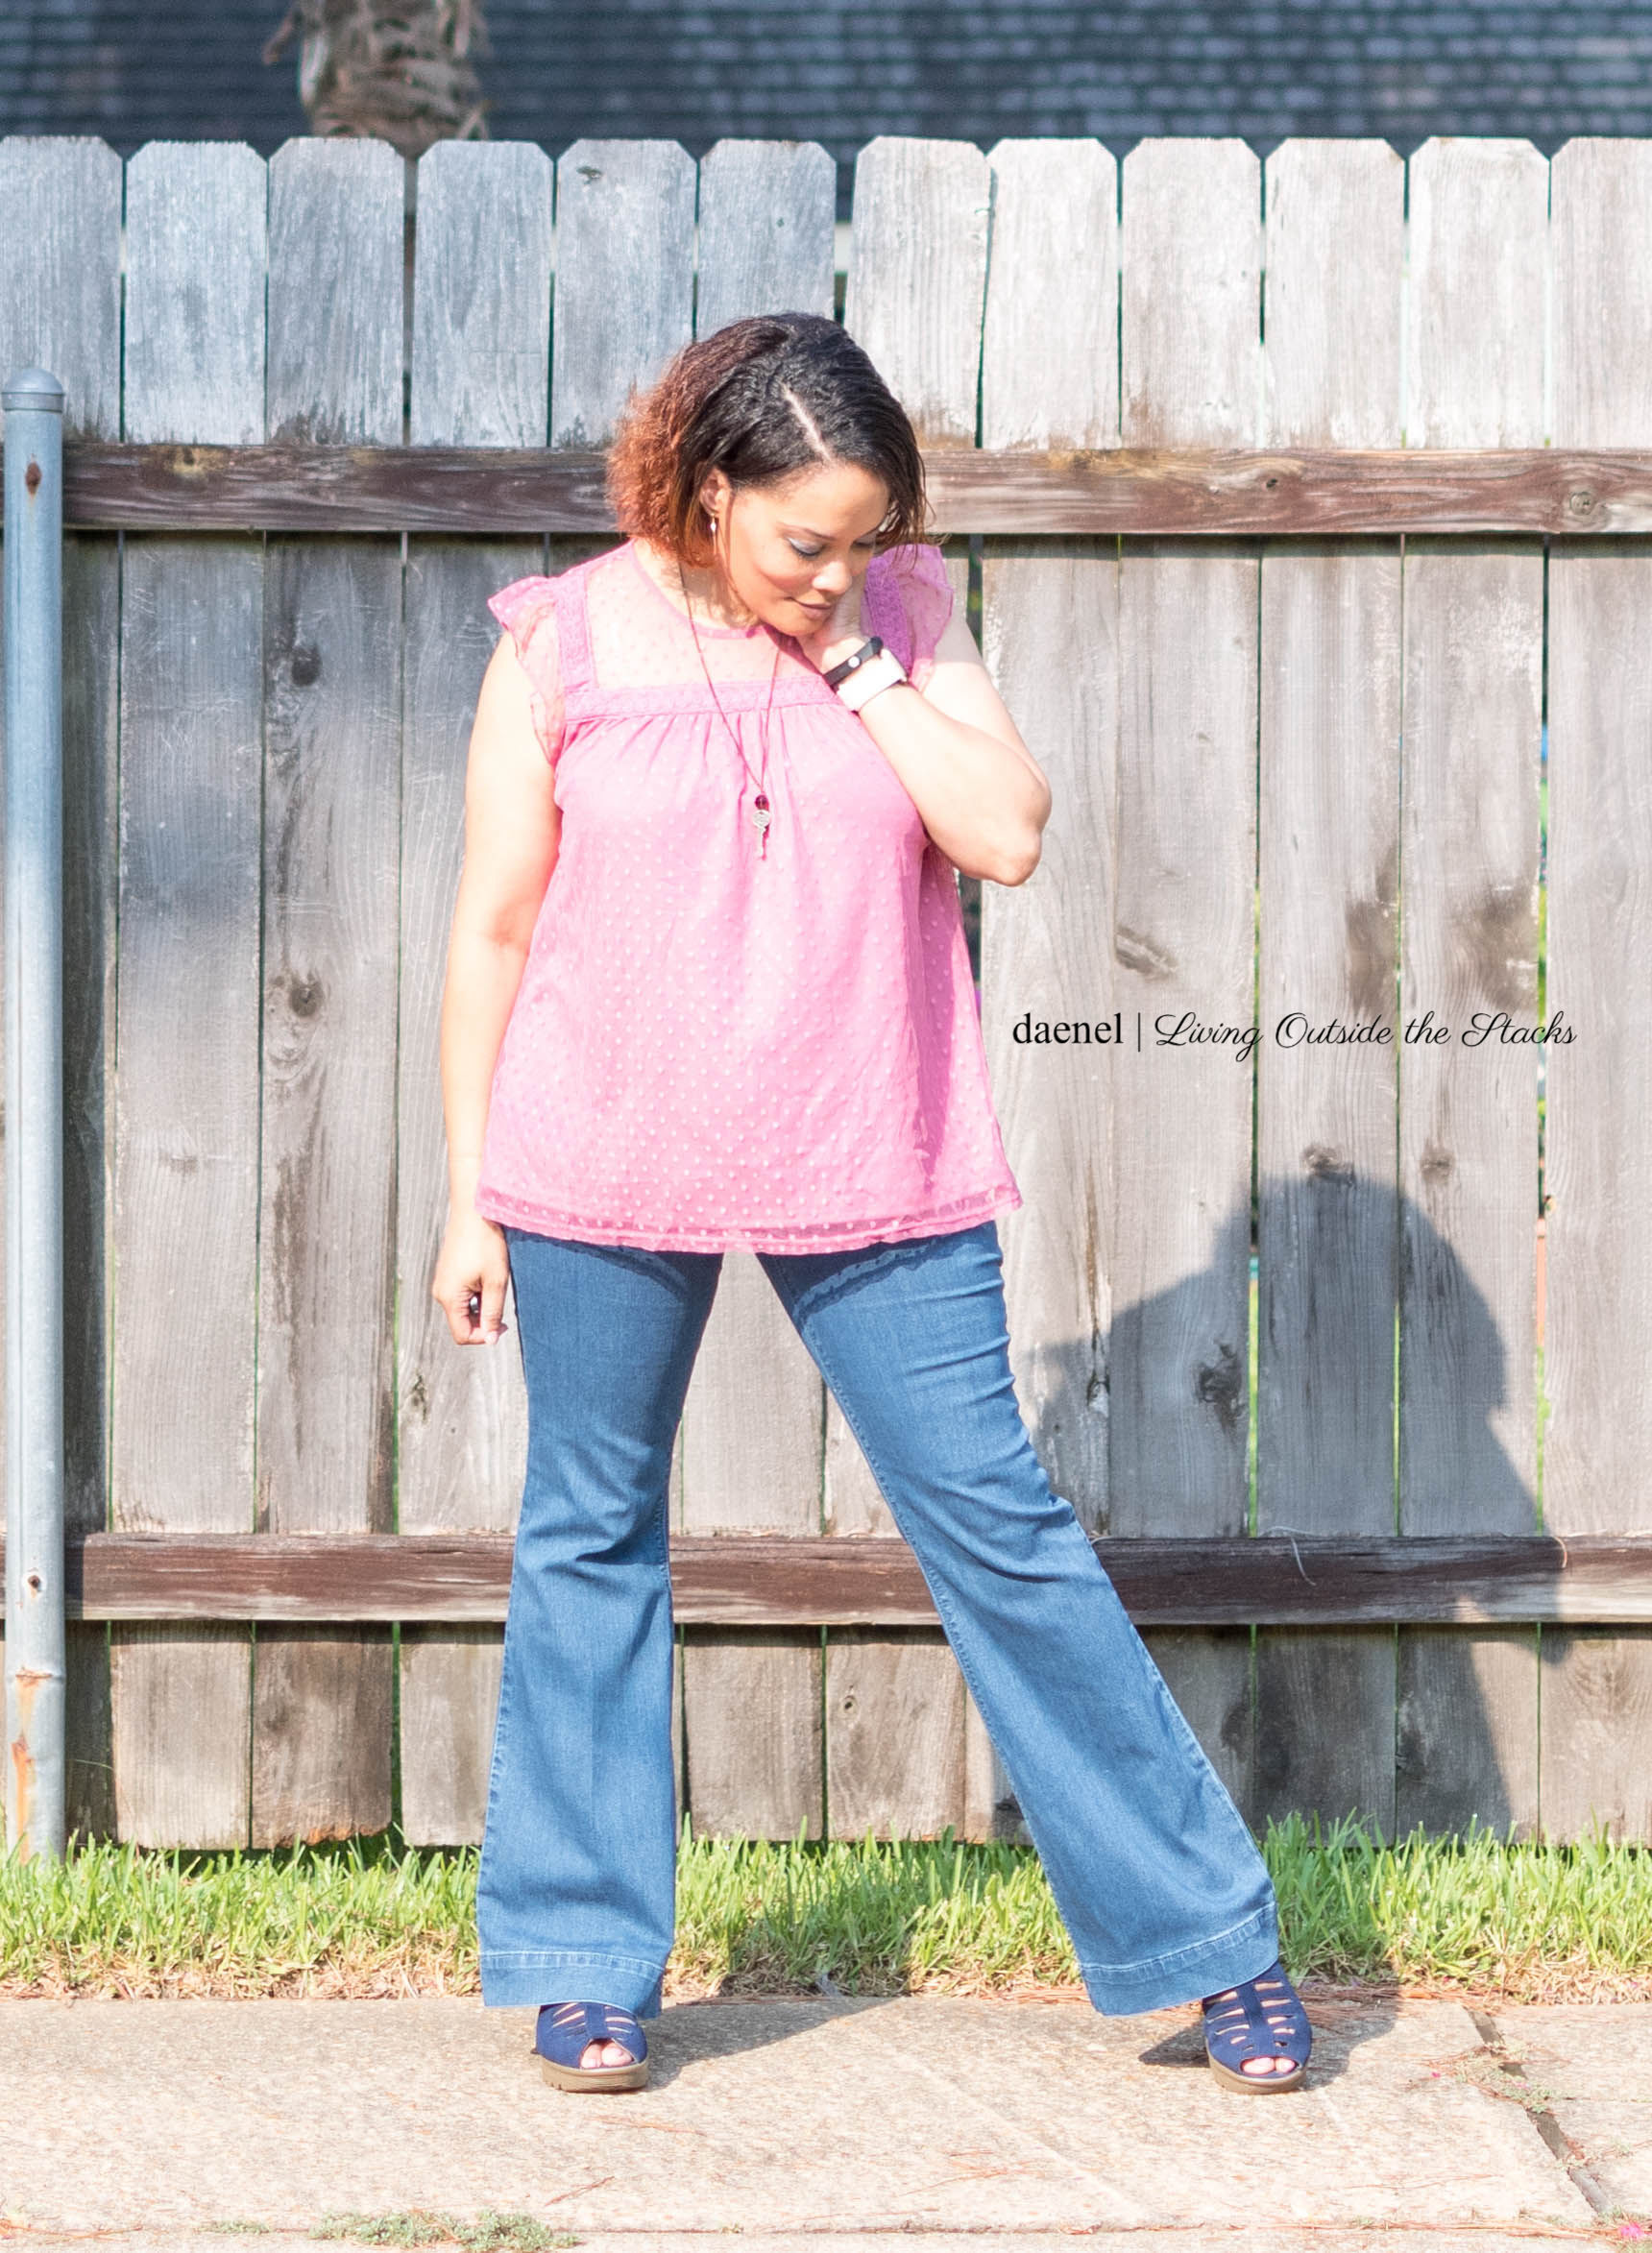 Laurie Felt Flare Leg Jeans and Mauve Baby Doll Top with Skechers Shoes {living outside the stacks} #NiceJeans